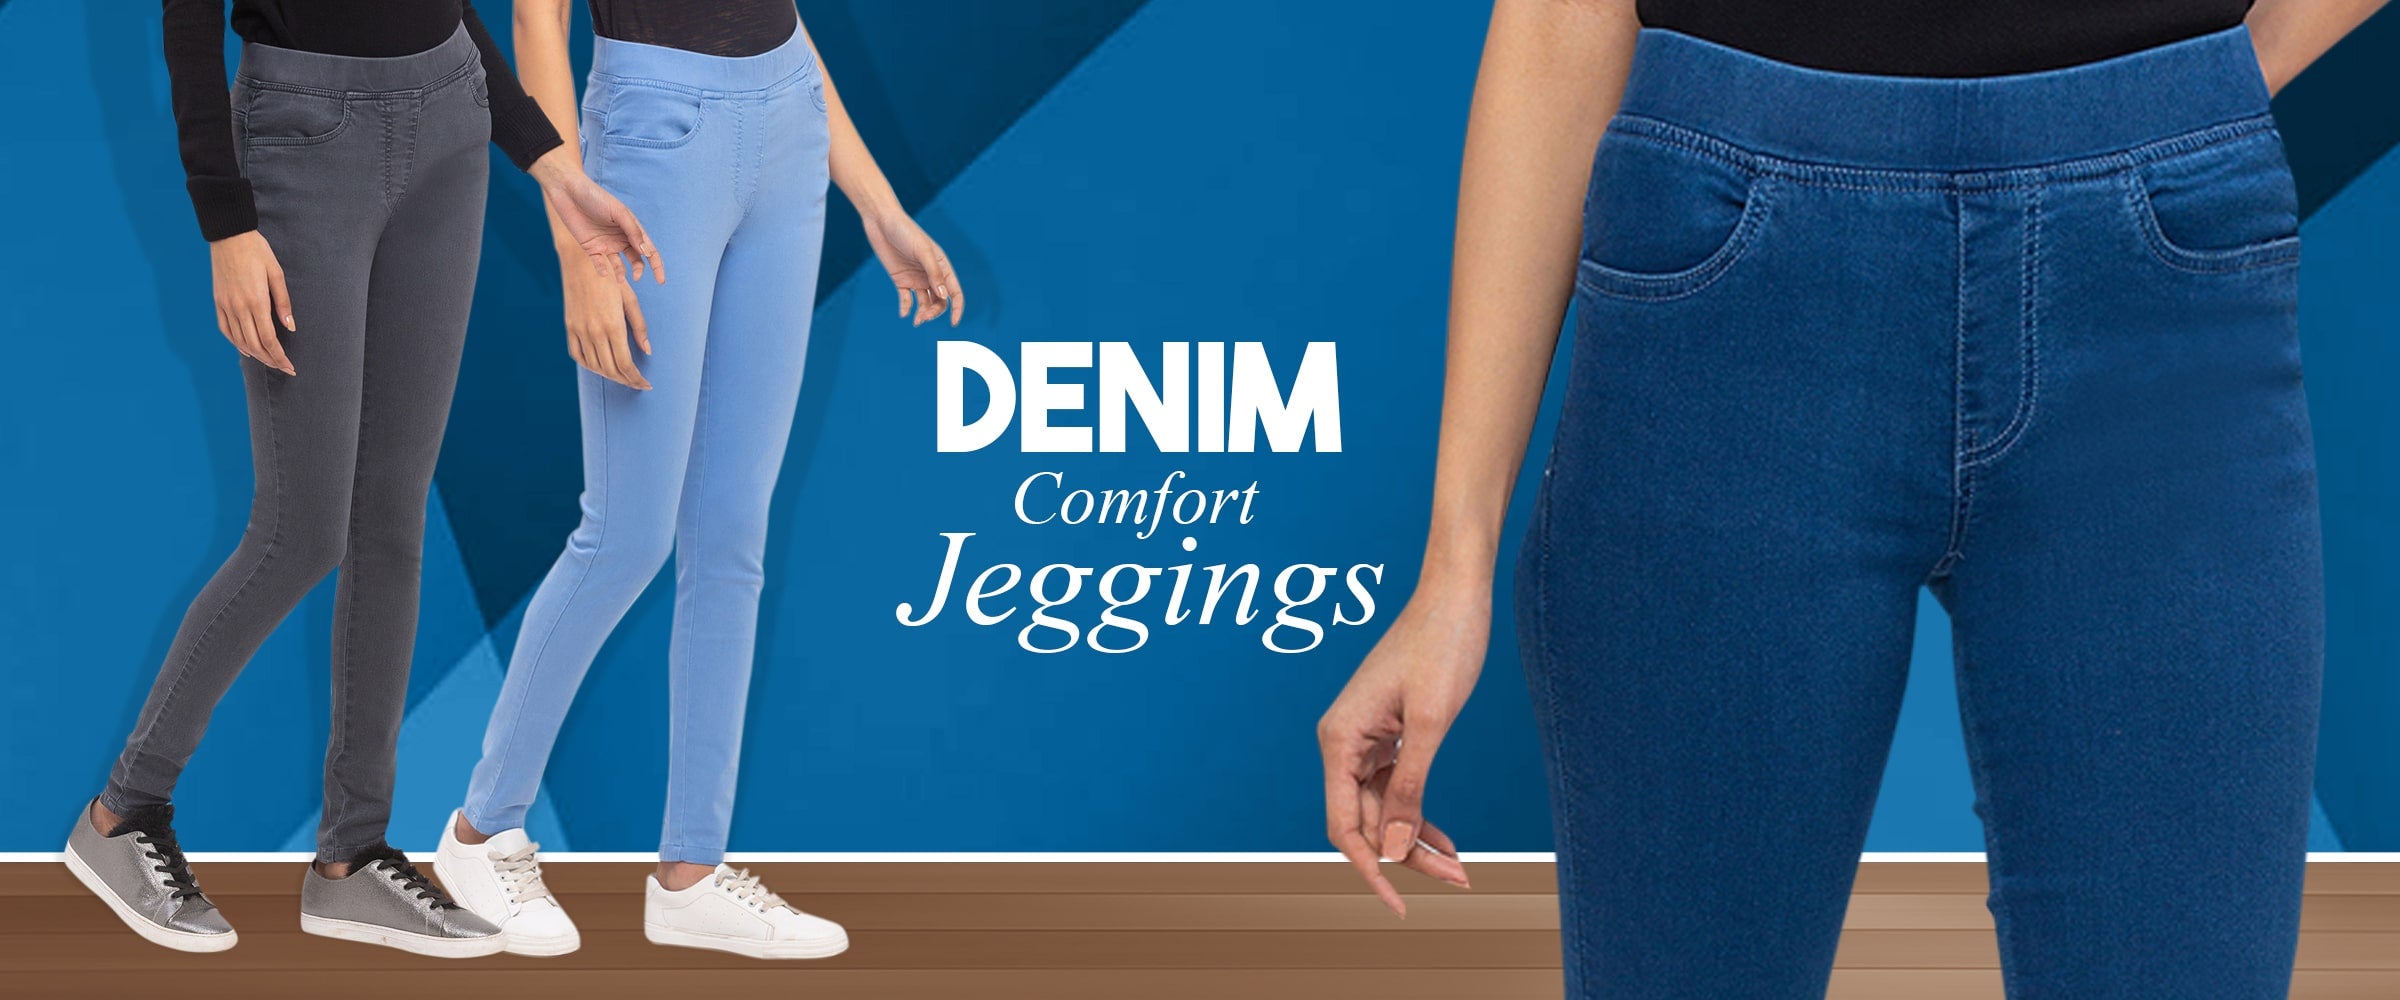 Occasion-Perfect Pairings: Elevating Formal Attire with Jeggings